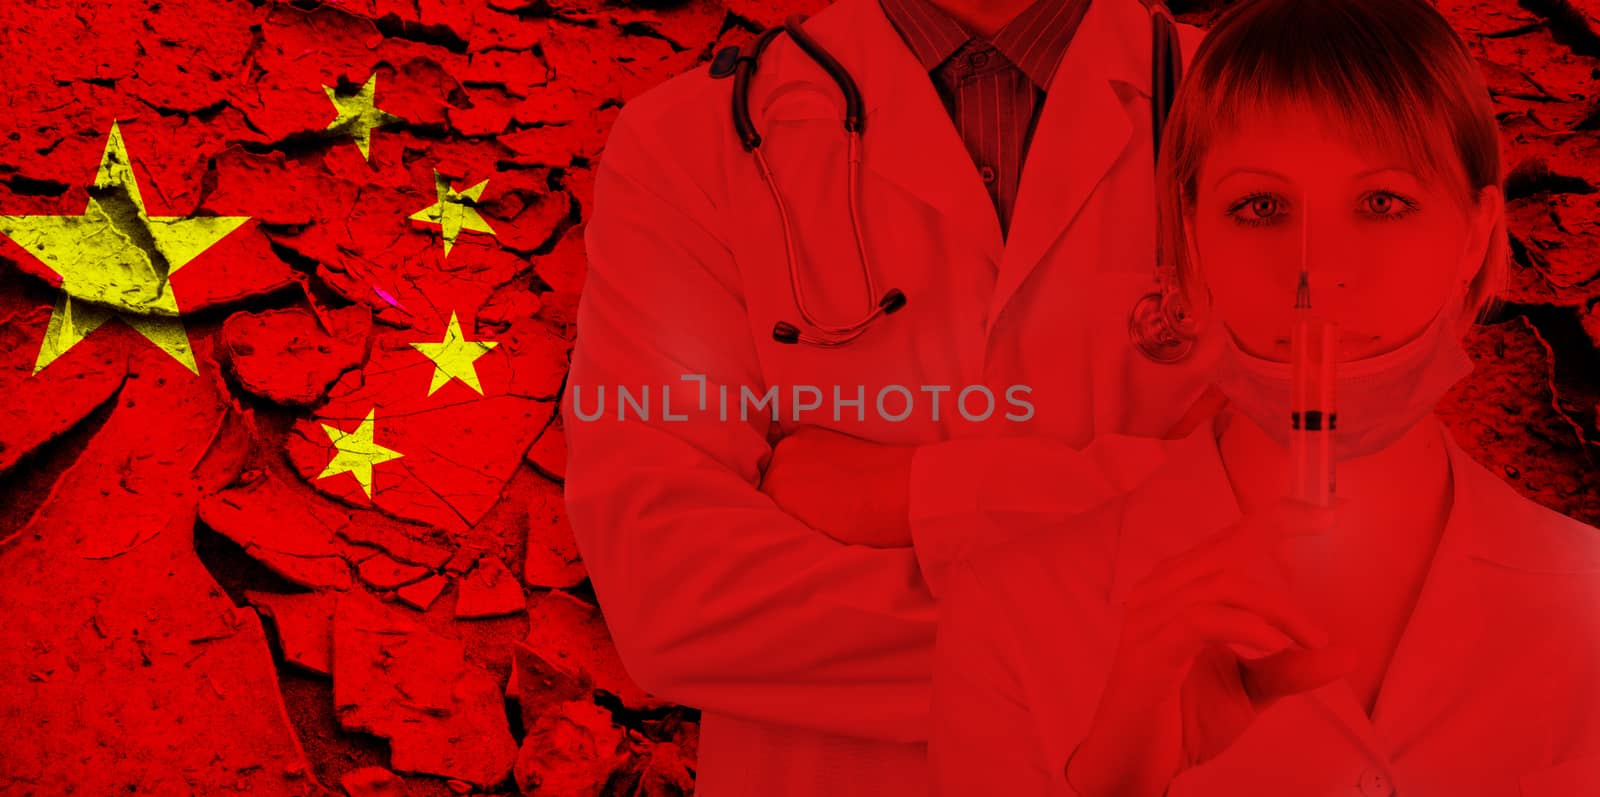 Male and female doctor on China flag background. Concept of corona virus.